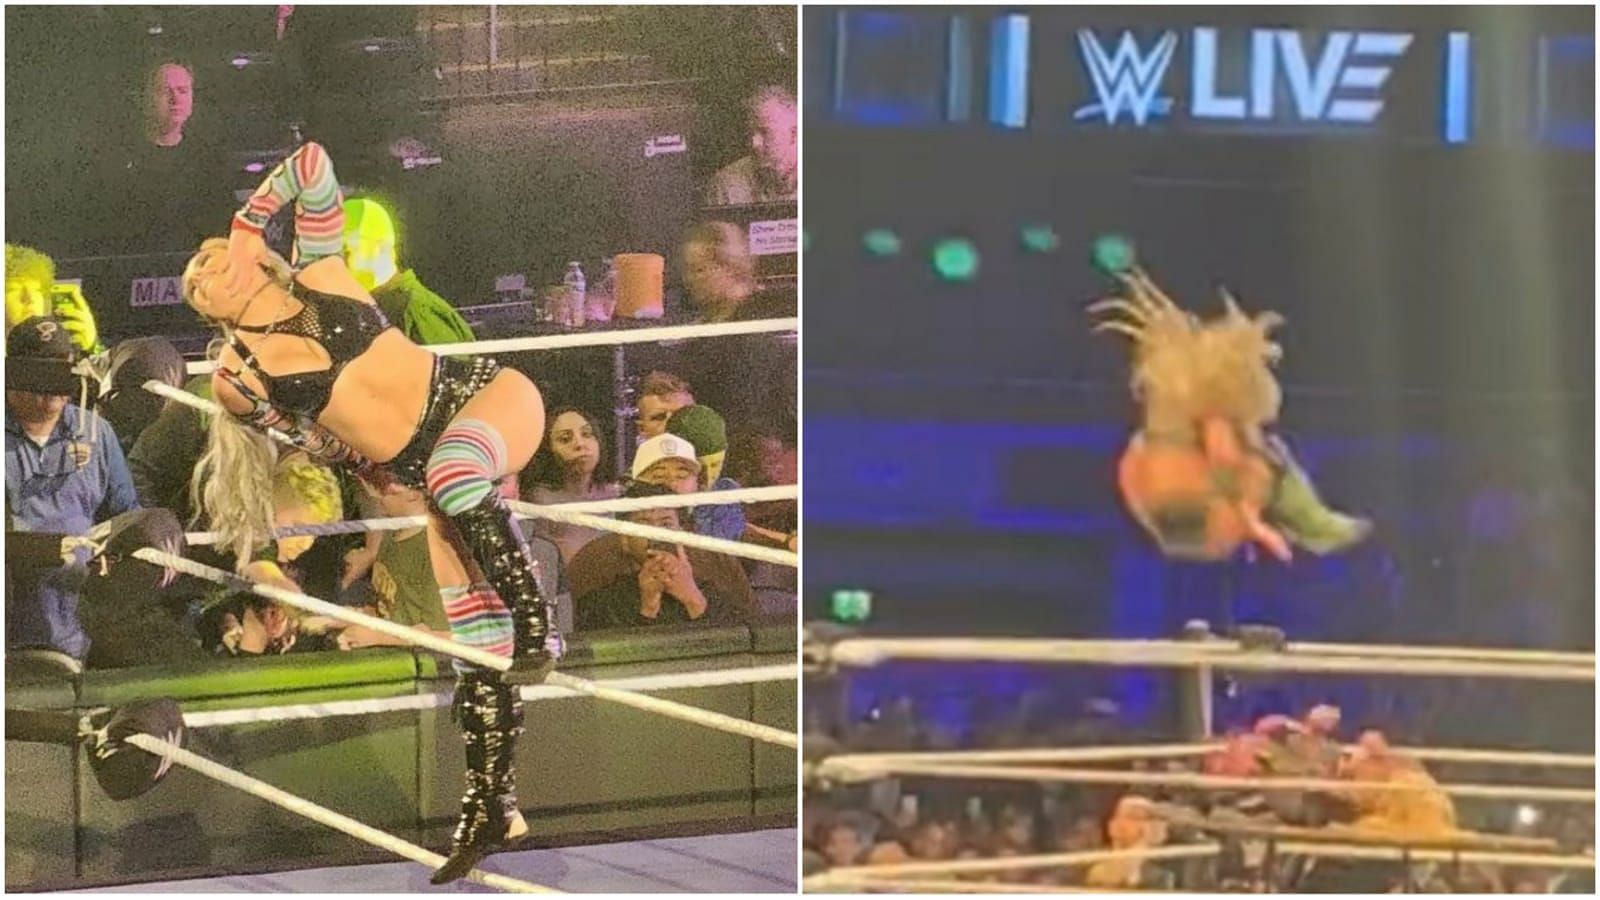 Liv Morgan was in action at WWE live event in Glasgow, Scotland